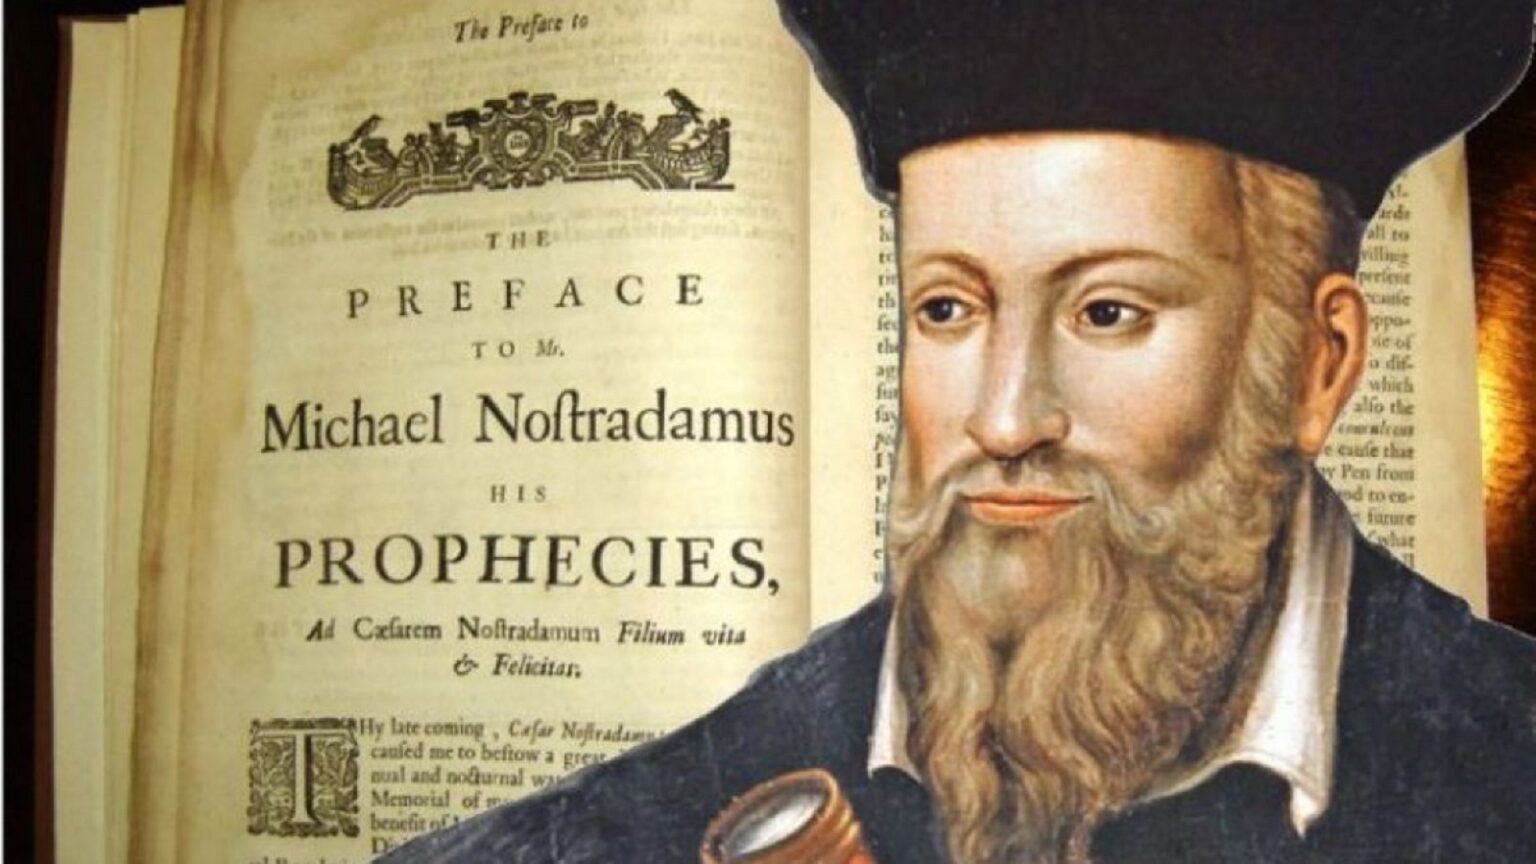 Was Nostradamus The Greatest Prophet That Ever Lived? - DSF Antique Jewelry